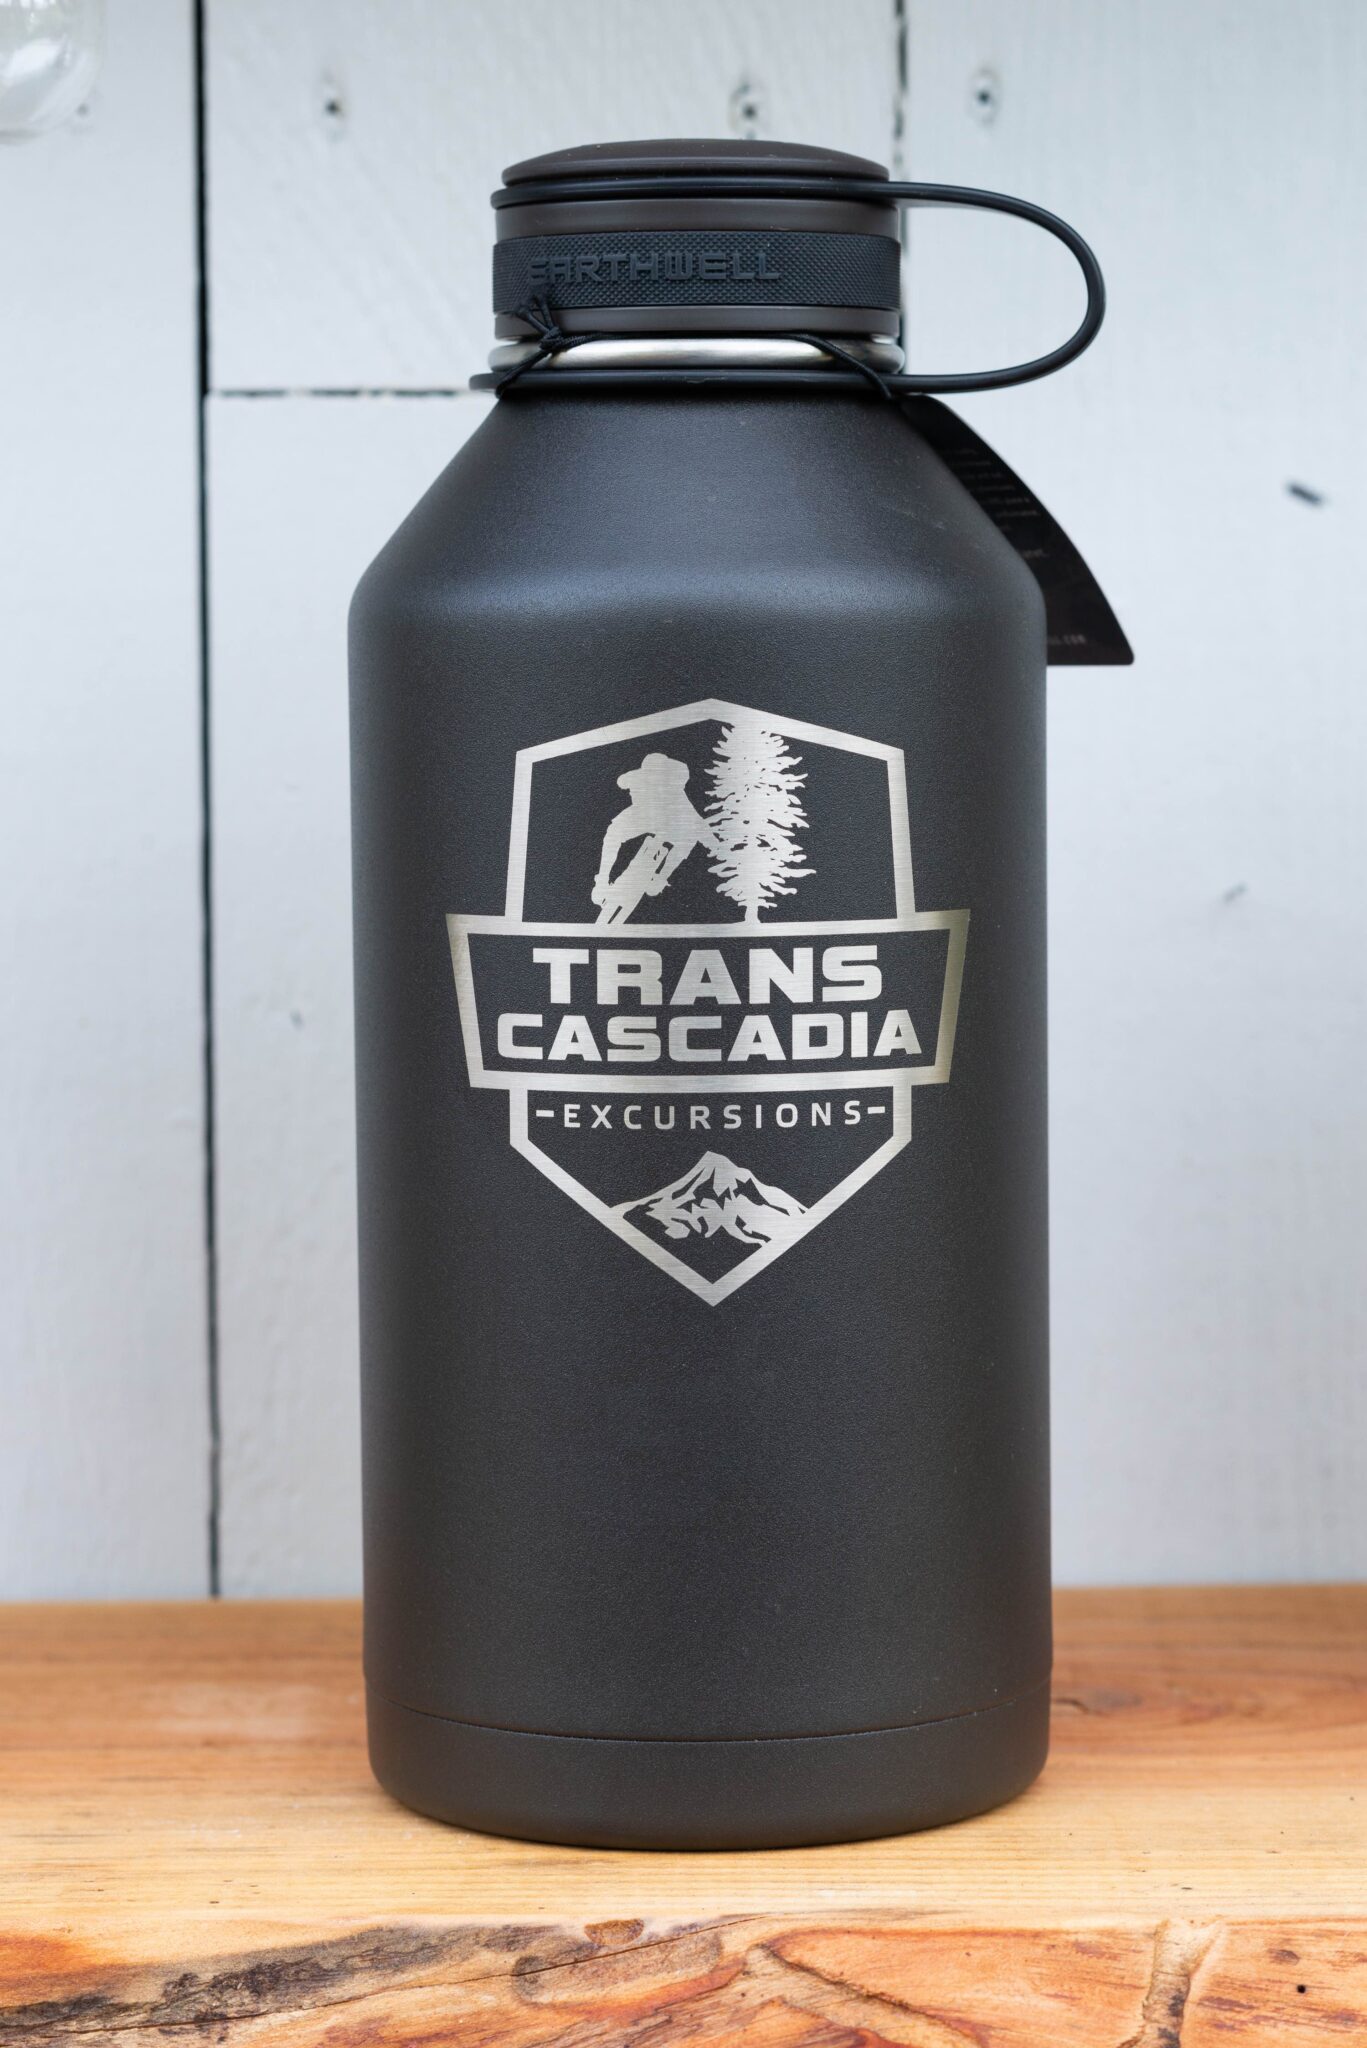 https://www.transcascadiaexcursions.com/wp-content/uploads/2021/08/TCE_Product-Water-Bottle_Large_Black-scaled.jpeg